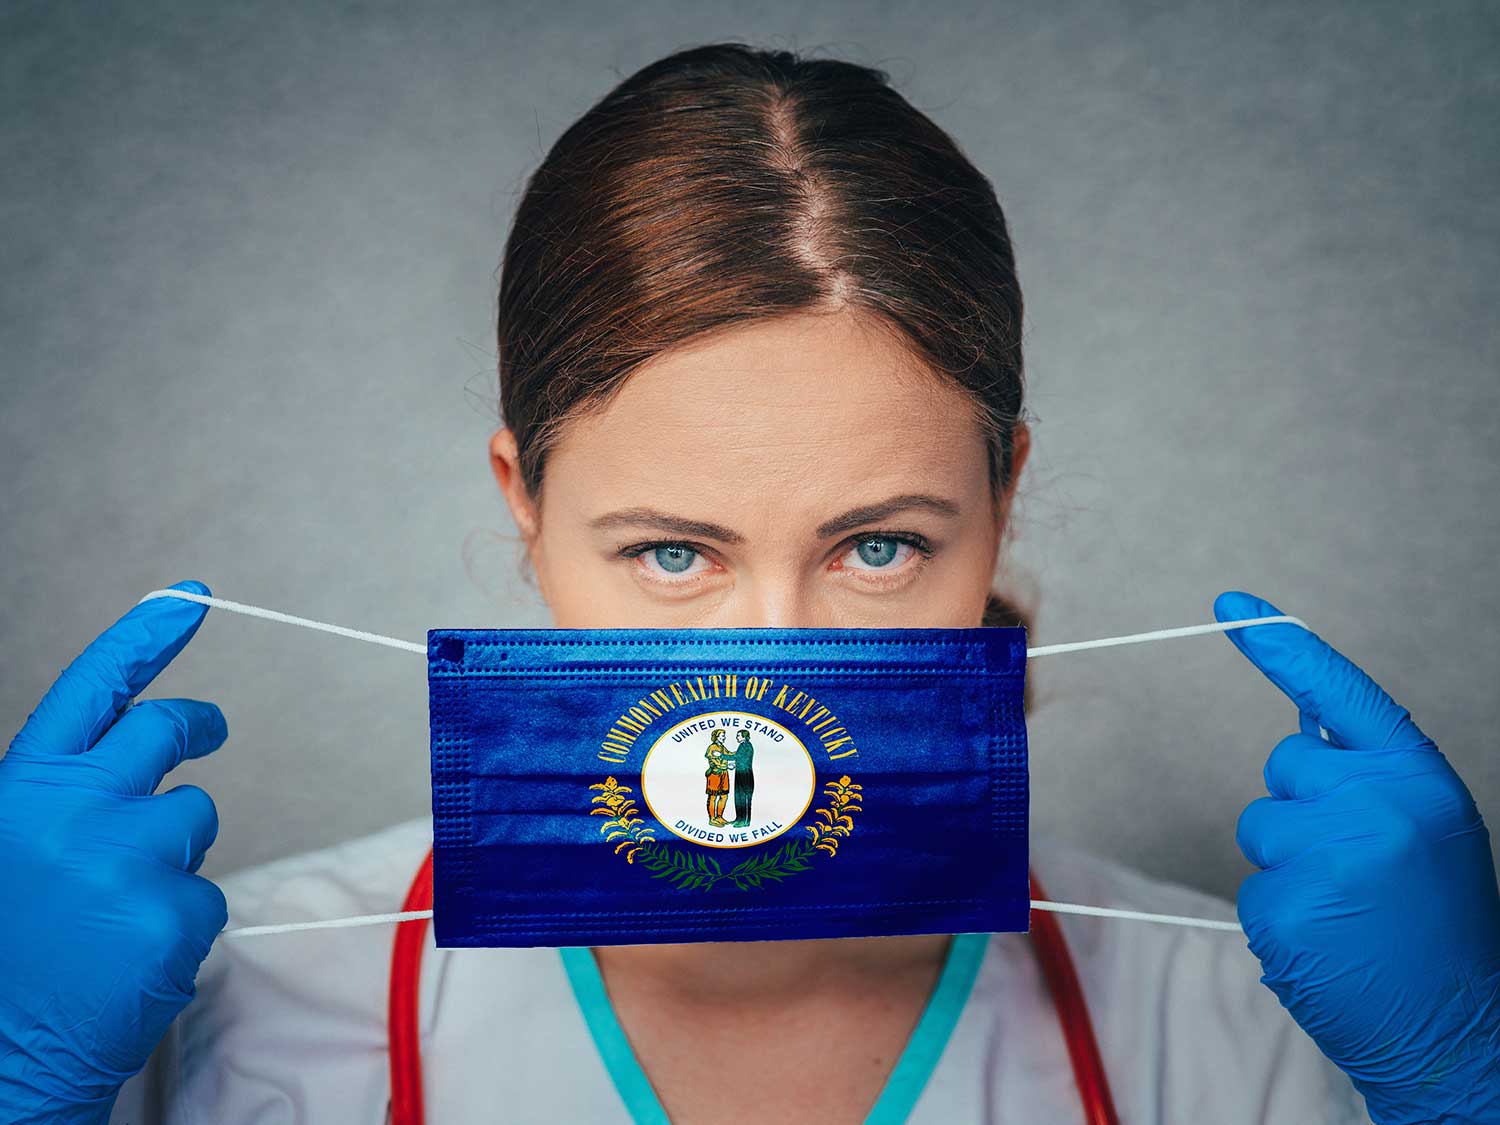 A Physician With Medical Malpractice Insurance Putting On A Surgical Mask Printed With The Kentucky State Flag